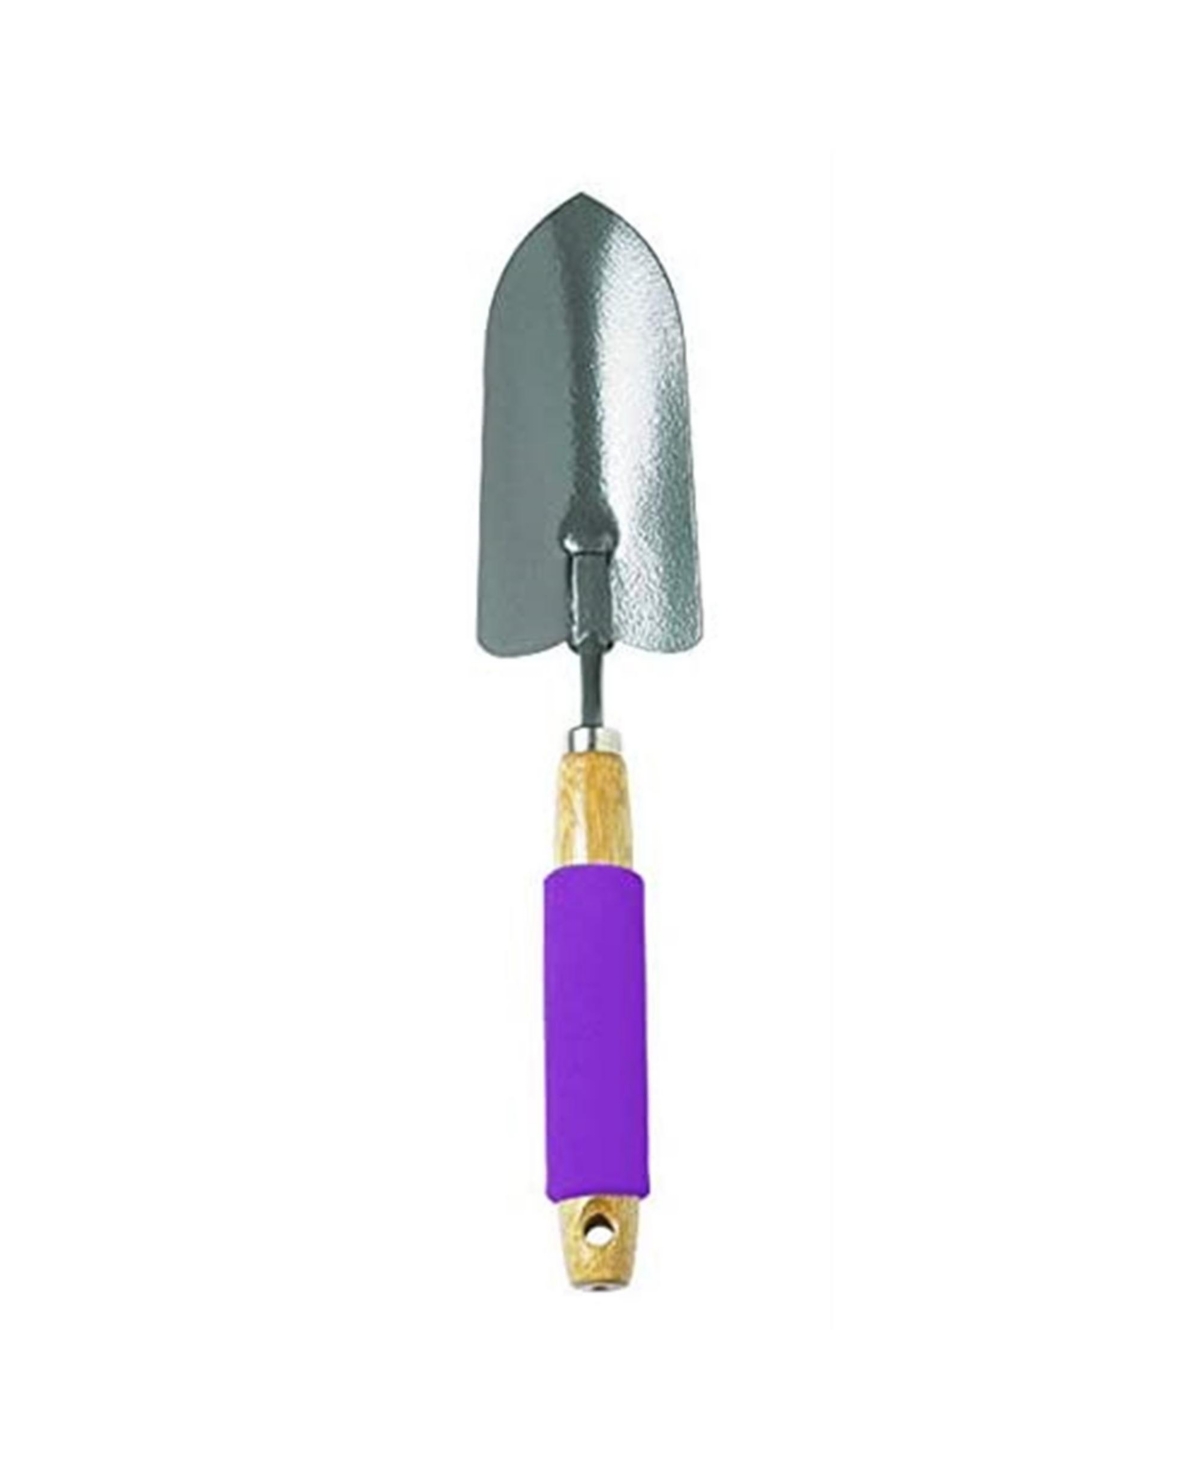 Garden Cushion Grip Trowel, Assorted Colors, Pack of One - Multi